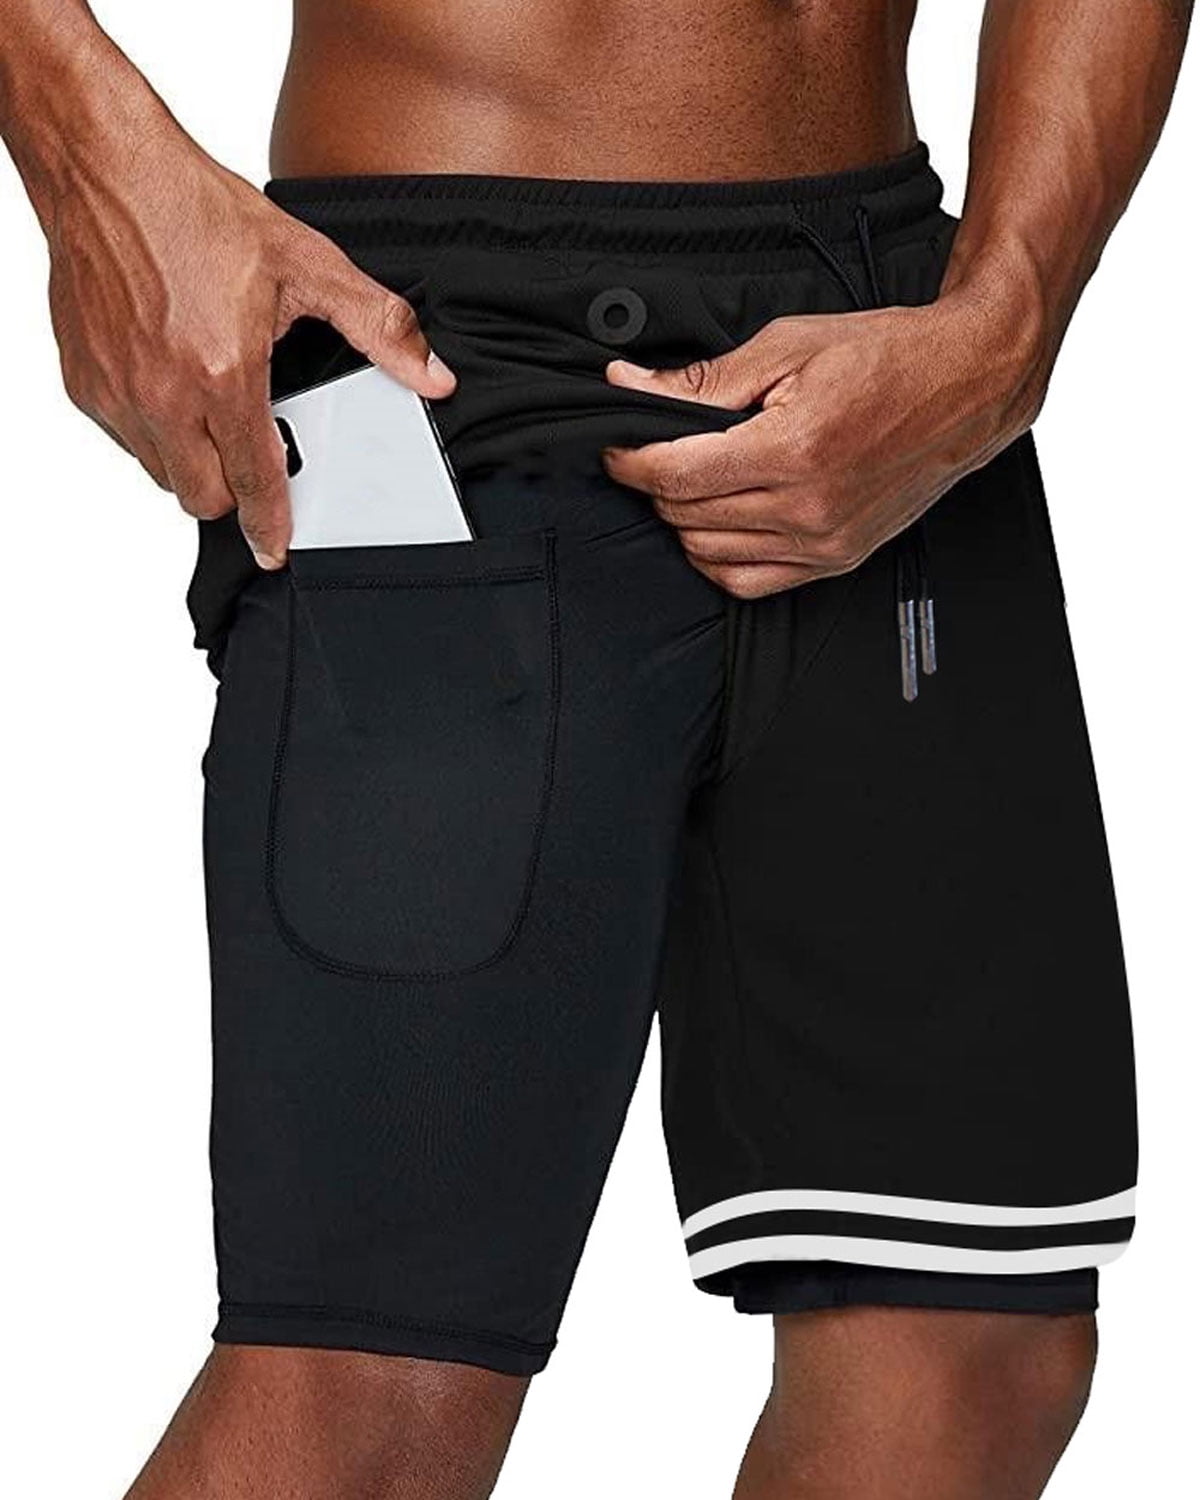 Under Armour Launch SW 2-in-1 Men's Running Shorts Black/Grey 1326576-002 -  Free Shipping at LASC